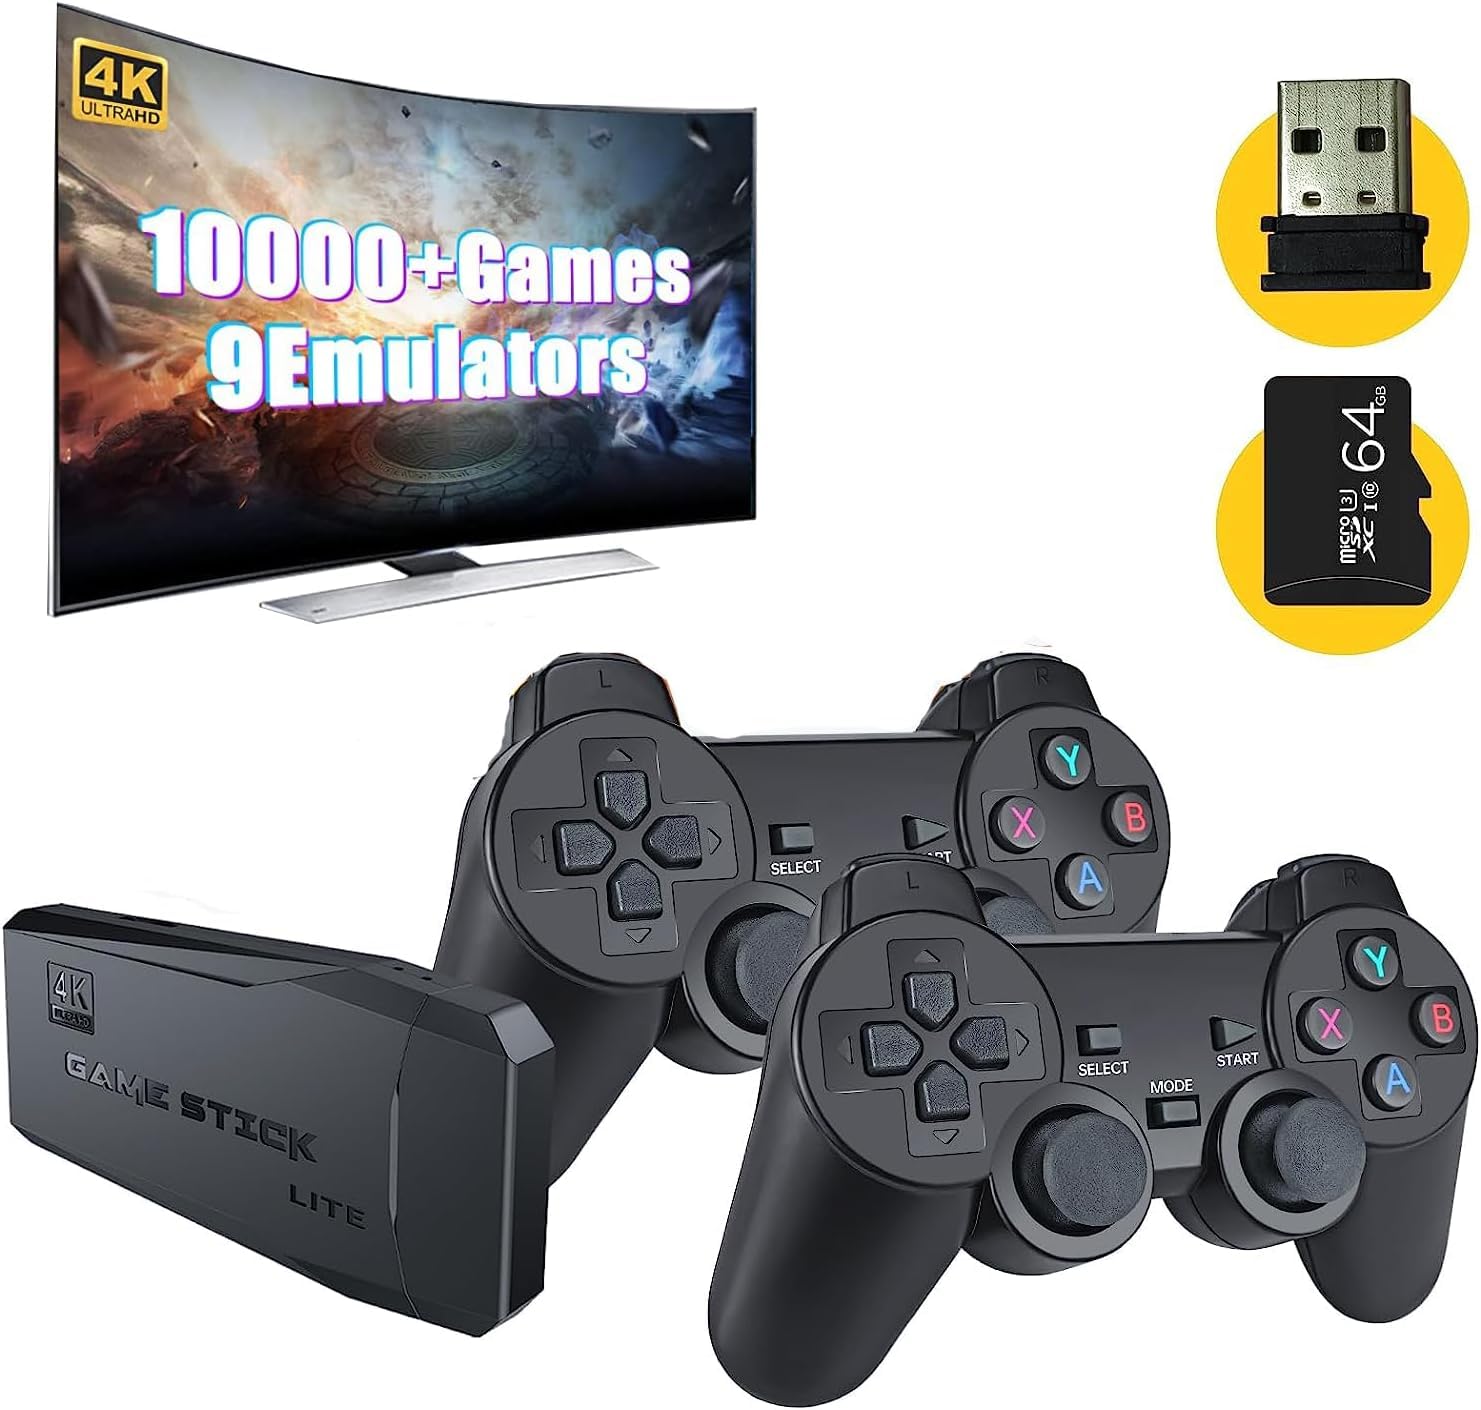 Retro Game Console,Retro Game Stick,Nostalgia Stick Game,4K HDMI Output,Plug and Play Video Game Stick Built in 10000+ Games,9 Classic Emulators, with Dual 2.4G Wireless Controllers